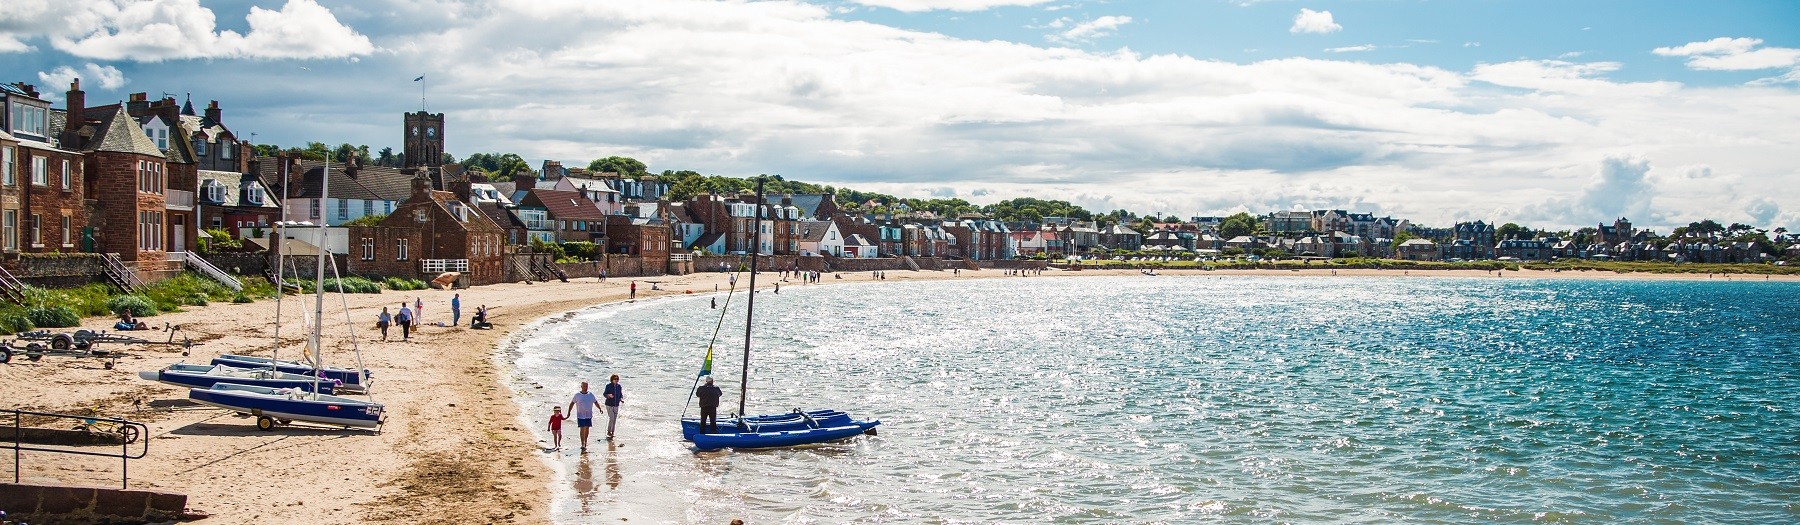 West Bay Beach North Berwick. Burntisland. Credit Visit Scotland and Grant Paterson. Expires May 2025